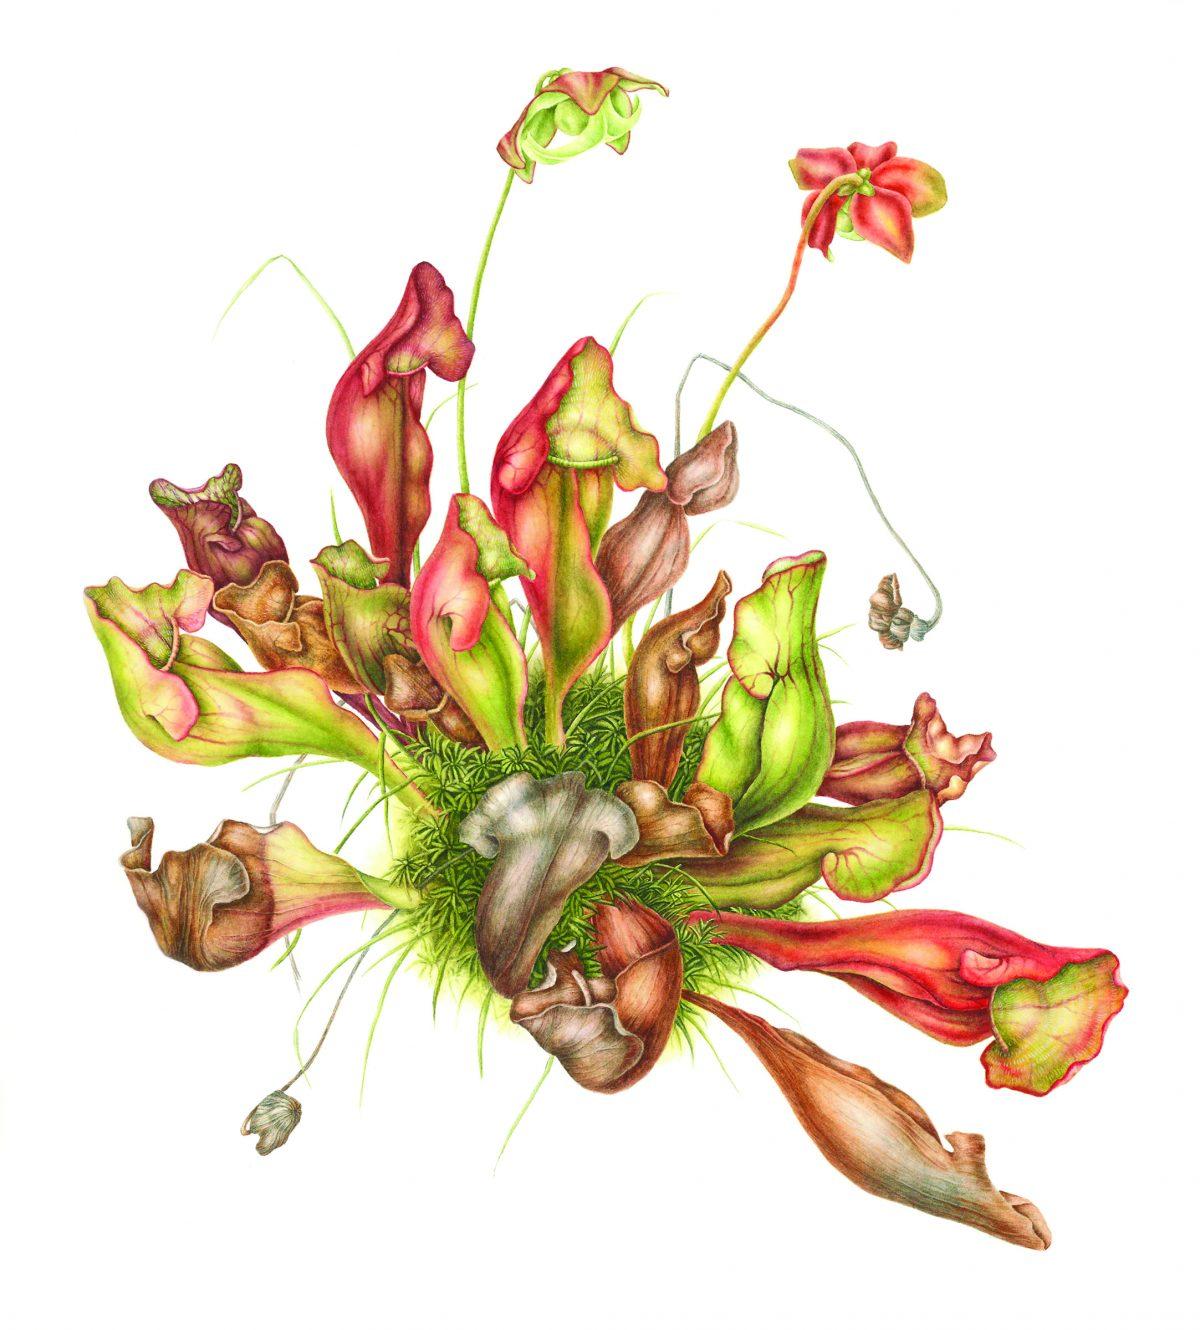 “Purple Pitcher Plant (Sarracenia purpurea),” 2017, by Betsy Rogers-Knox. Watercolor on paper, 17 1/2 inches by 16 inches. (Betsy Rogers-Knox)